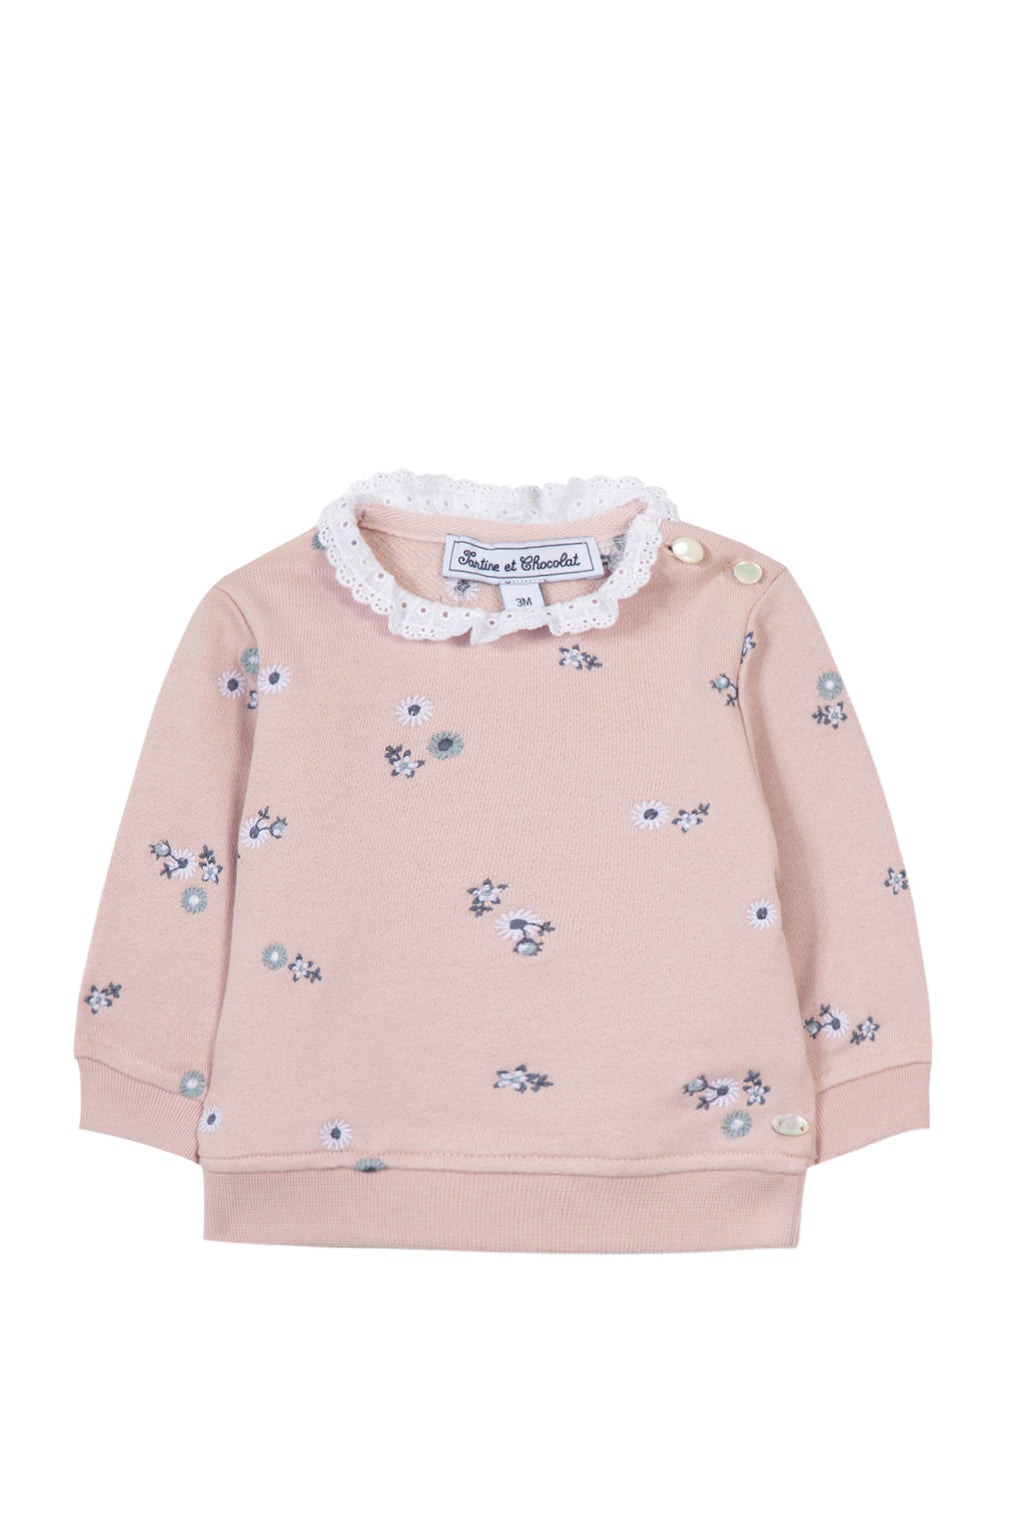 Sweatshirt - Lilas Embrodery floral